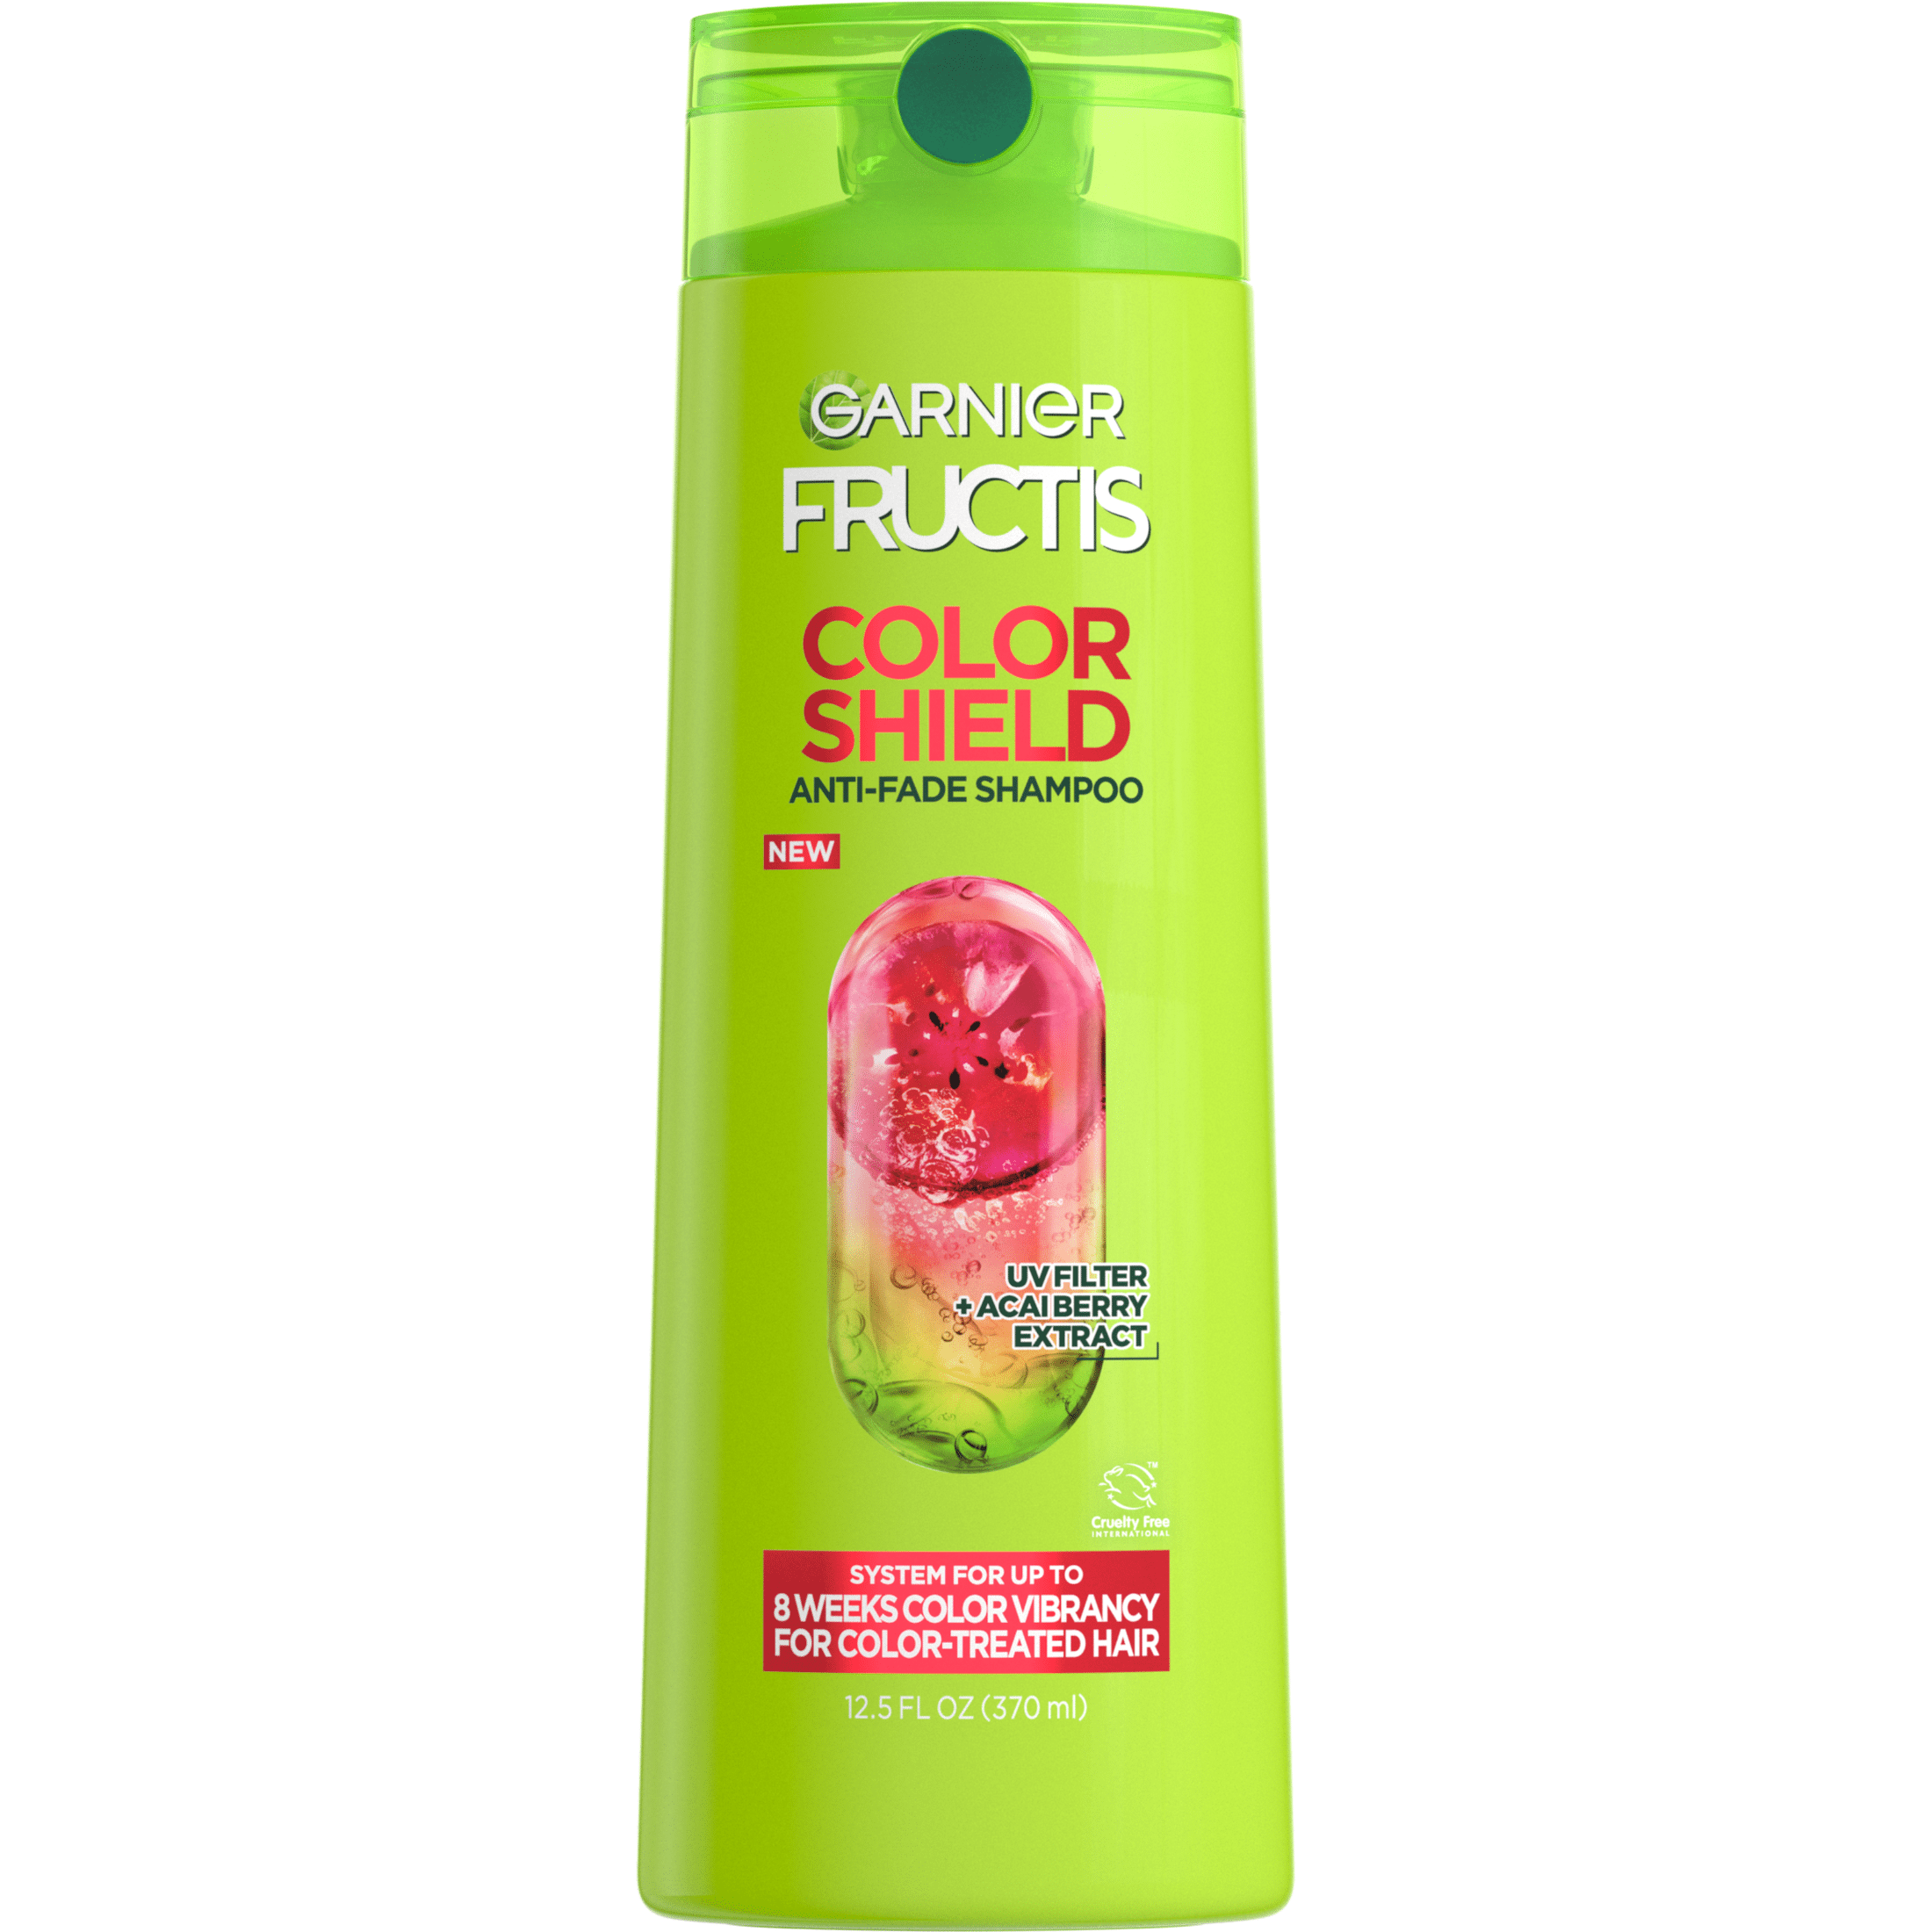 Extract, Garnier Fructis Protecting oz Shampoo Berry Color with Acai Color Shield fl 12.5